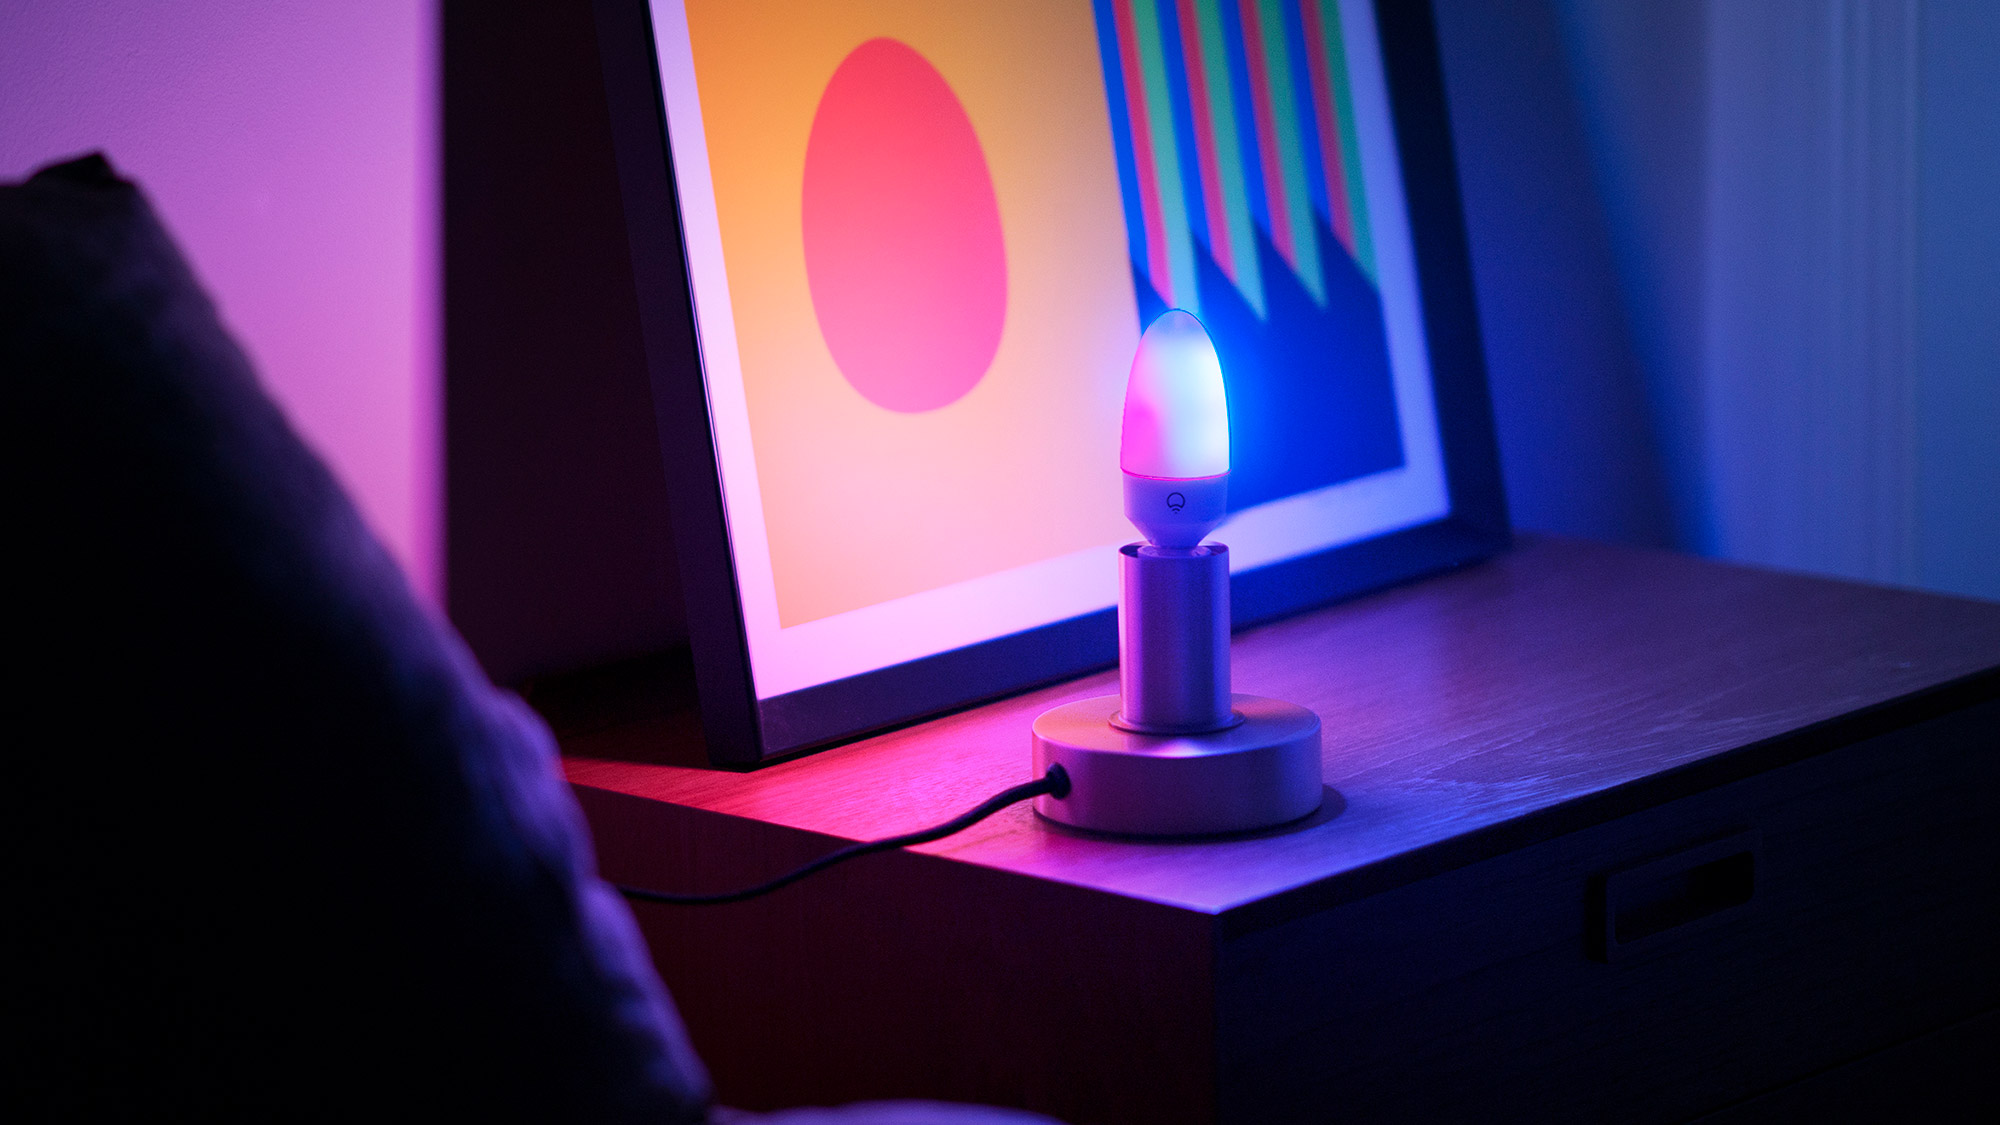 Candle Color Review: An Awesomely Colorful Smart Bulb | Tom's Guide